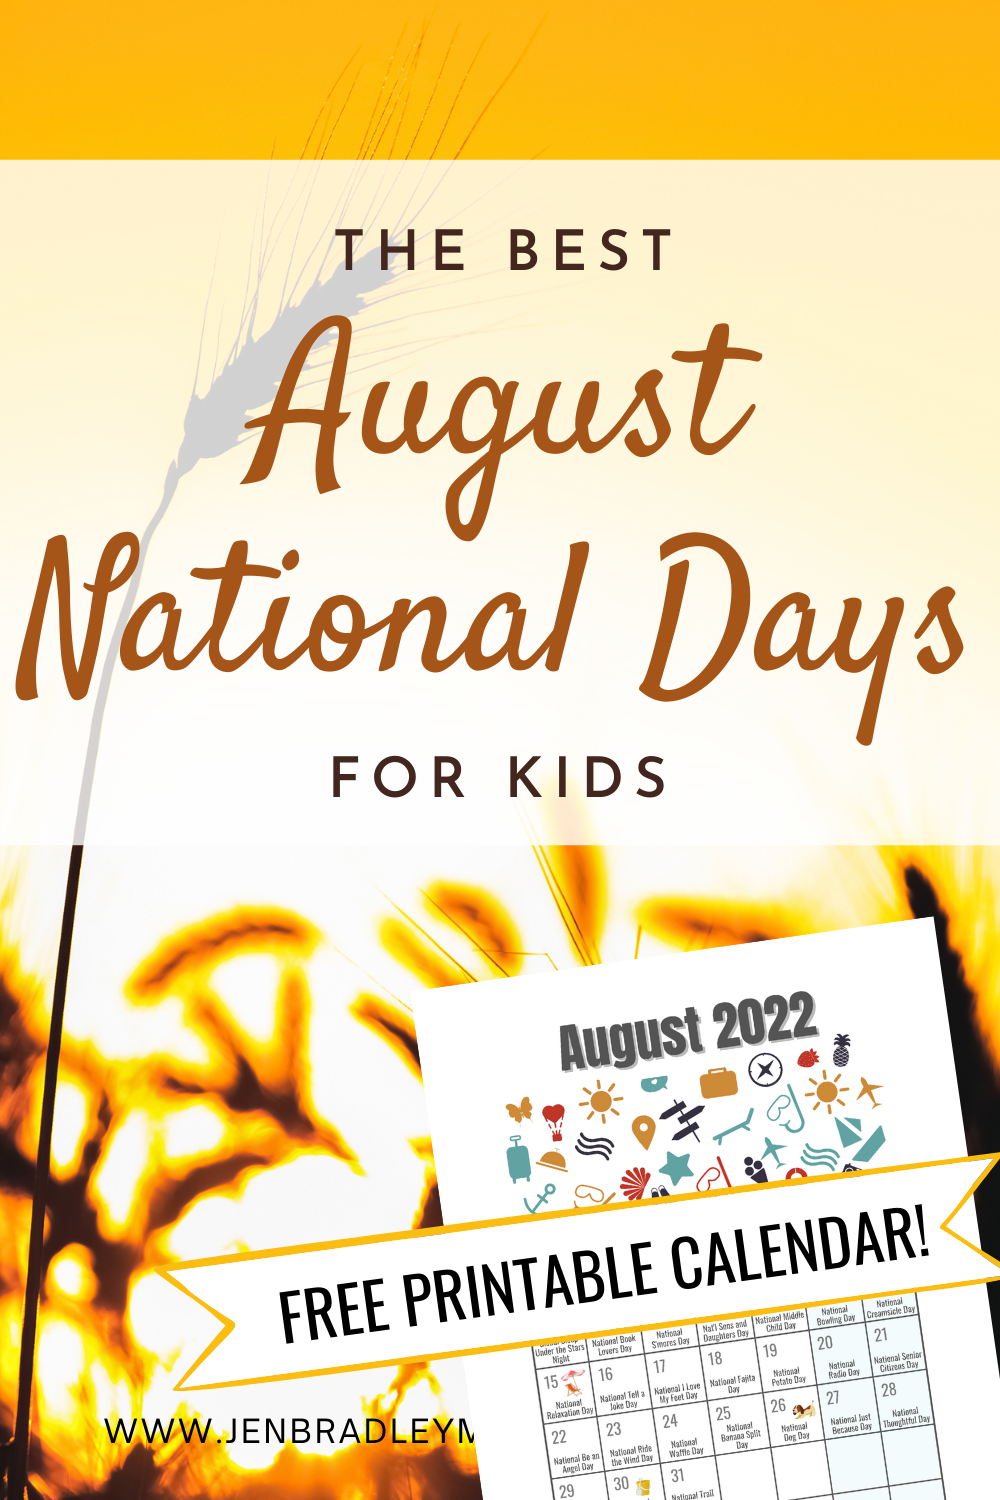 The Best August National Days for Kids to Celebrate